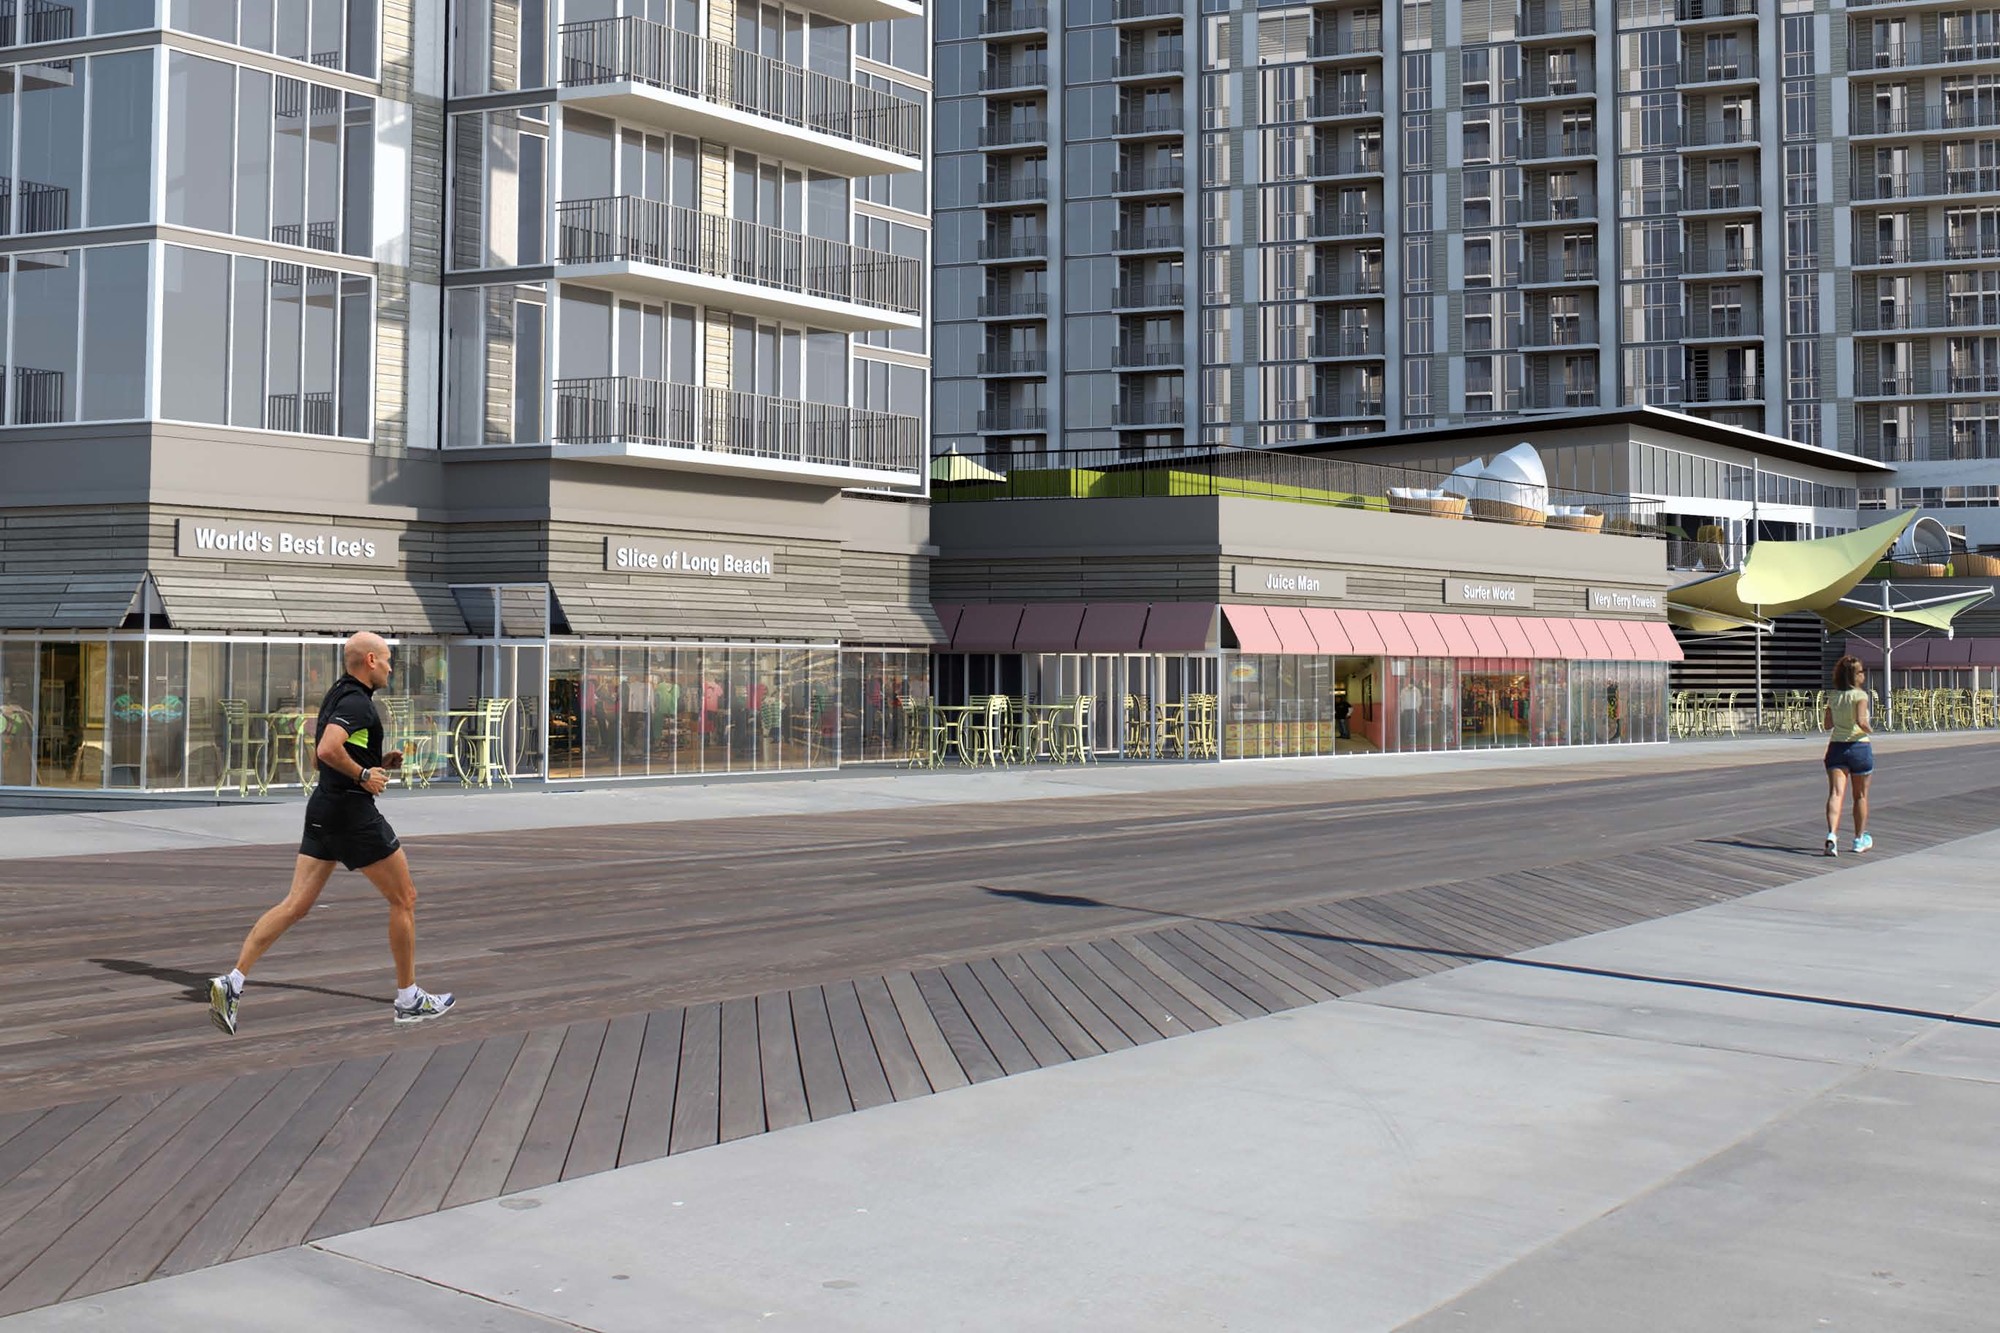 iStar is seeking a 20-year, $109 million tax break to build two, 17-story towers on the Superblock, with 522 luxury oceanfront rental apartments.